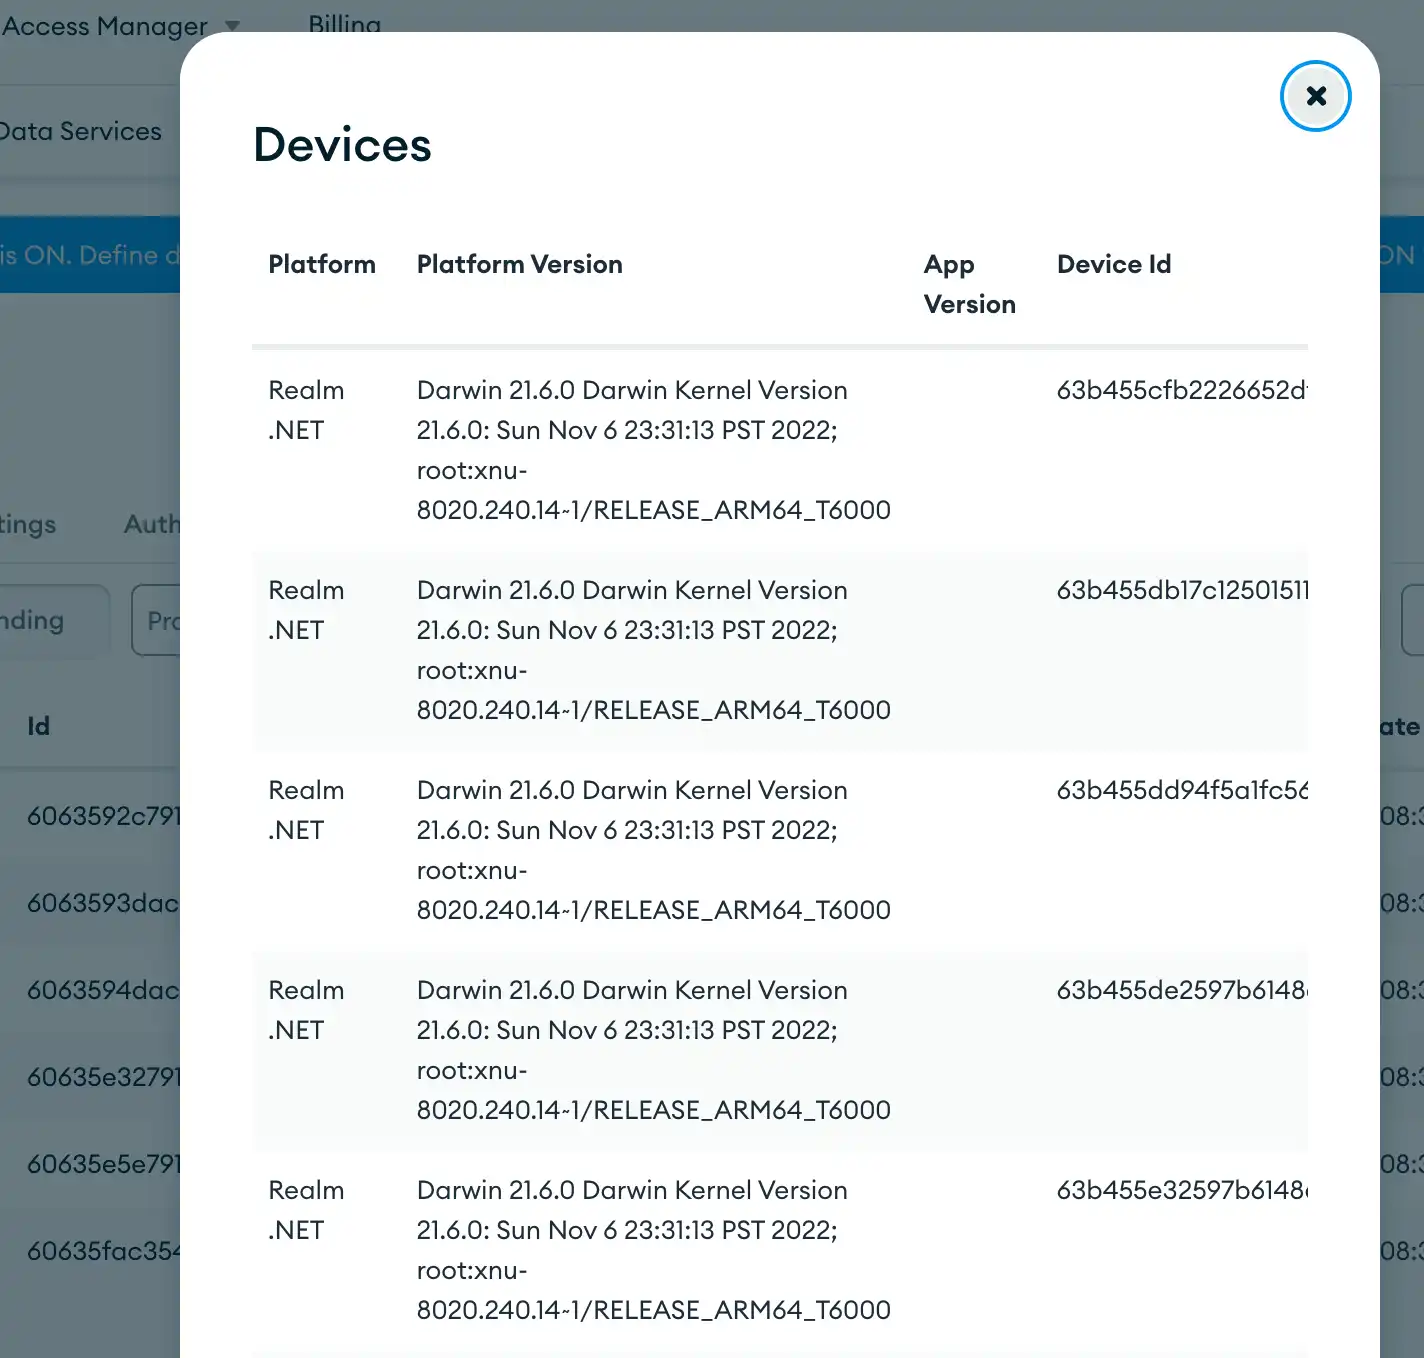 A detail view for a specific user that lists devices they've used with your app